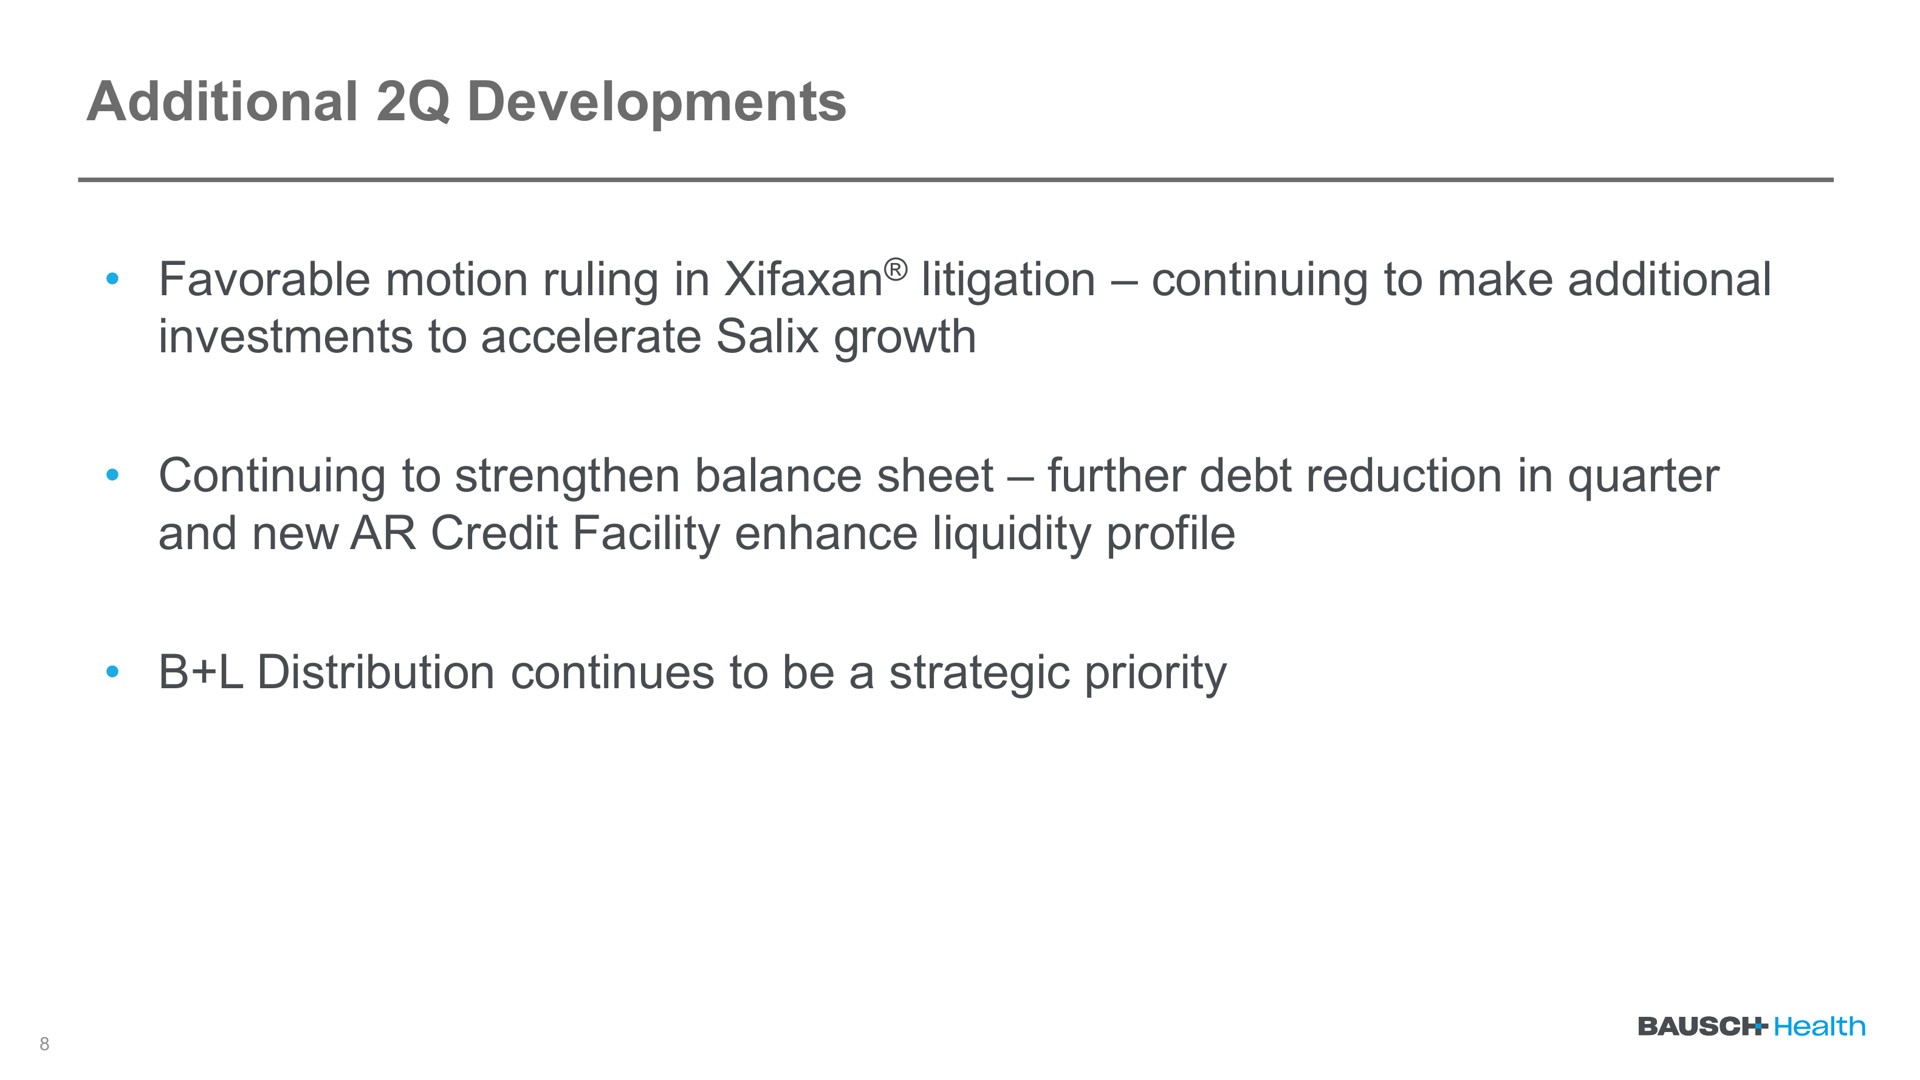 additional developments favorable motion ruling in litigation continuing to make additional investments to accelerate salix growth continuing to strengthen balance sheet further debt reduction in quarter and new credit facility enhance liquidity profile distribution continues to be a strategic priority | Bausch Health Companies